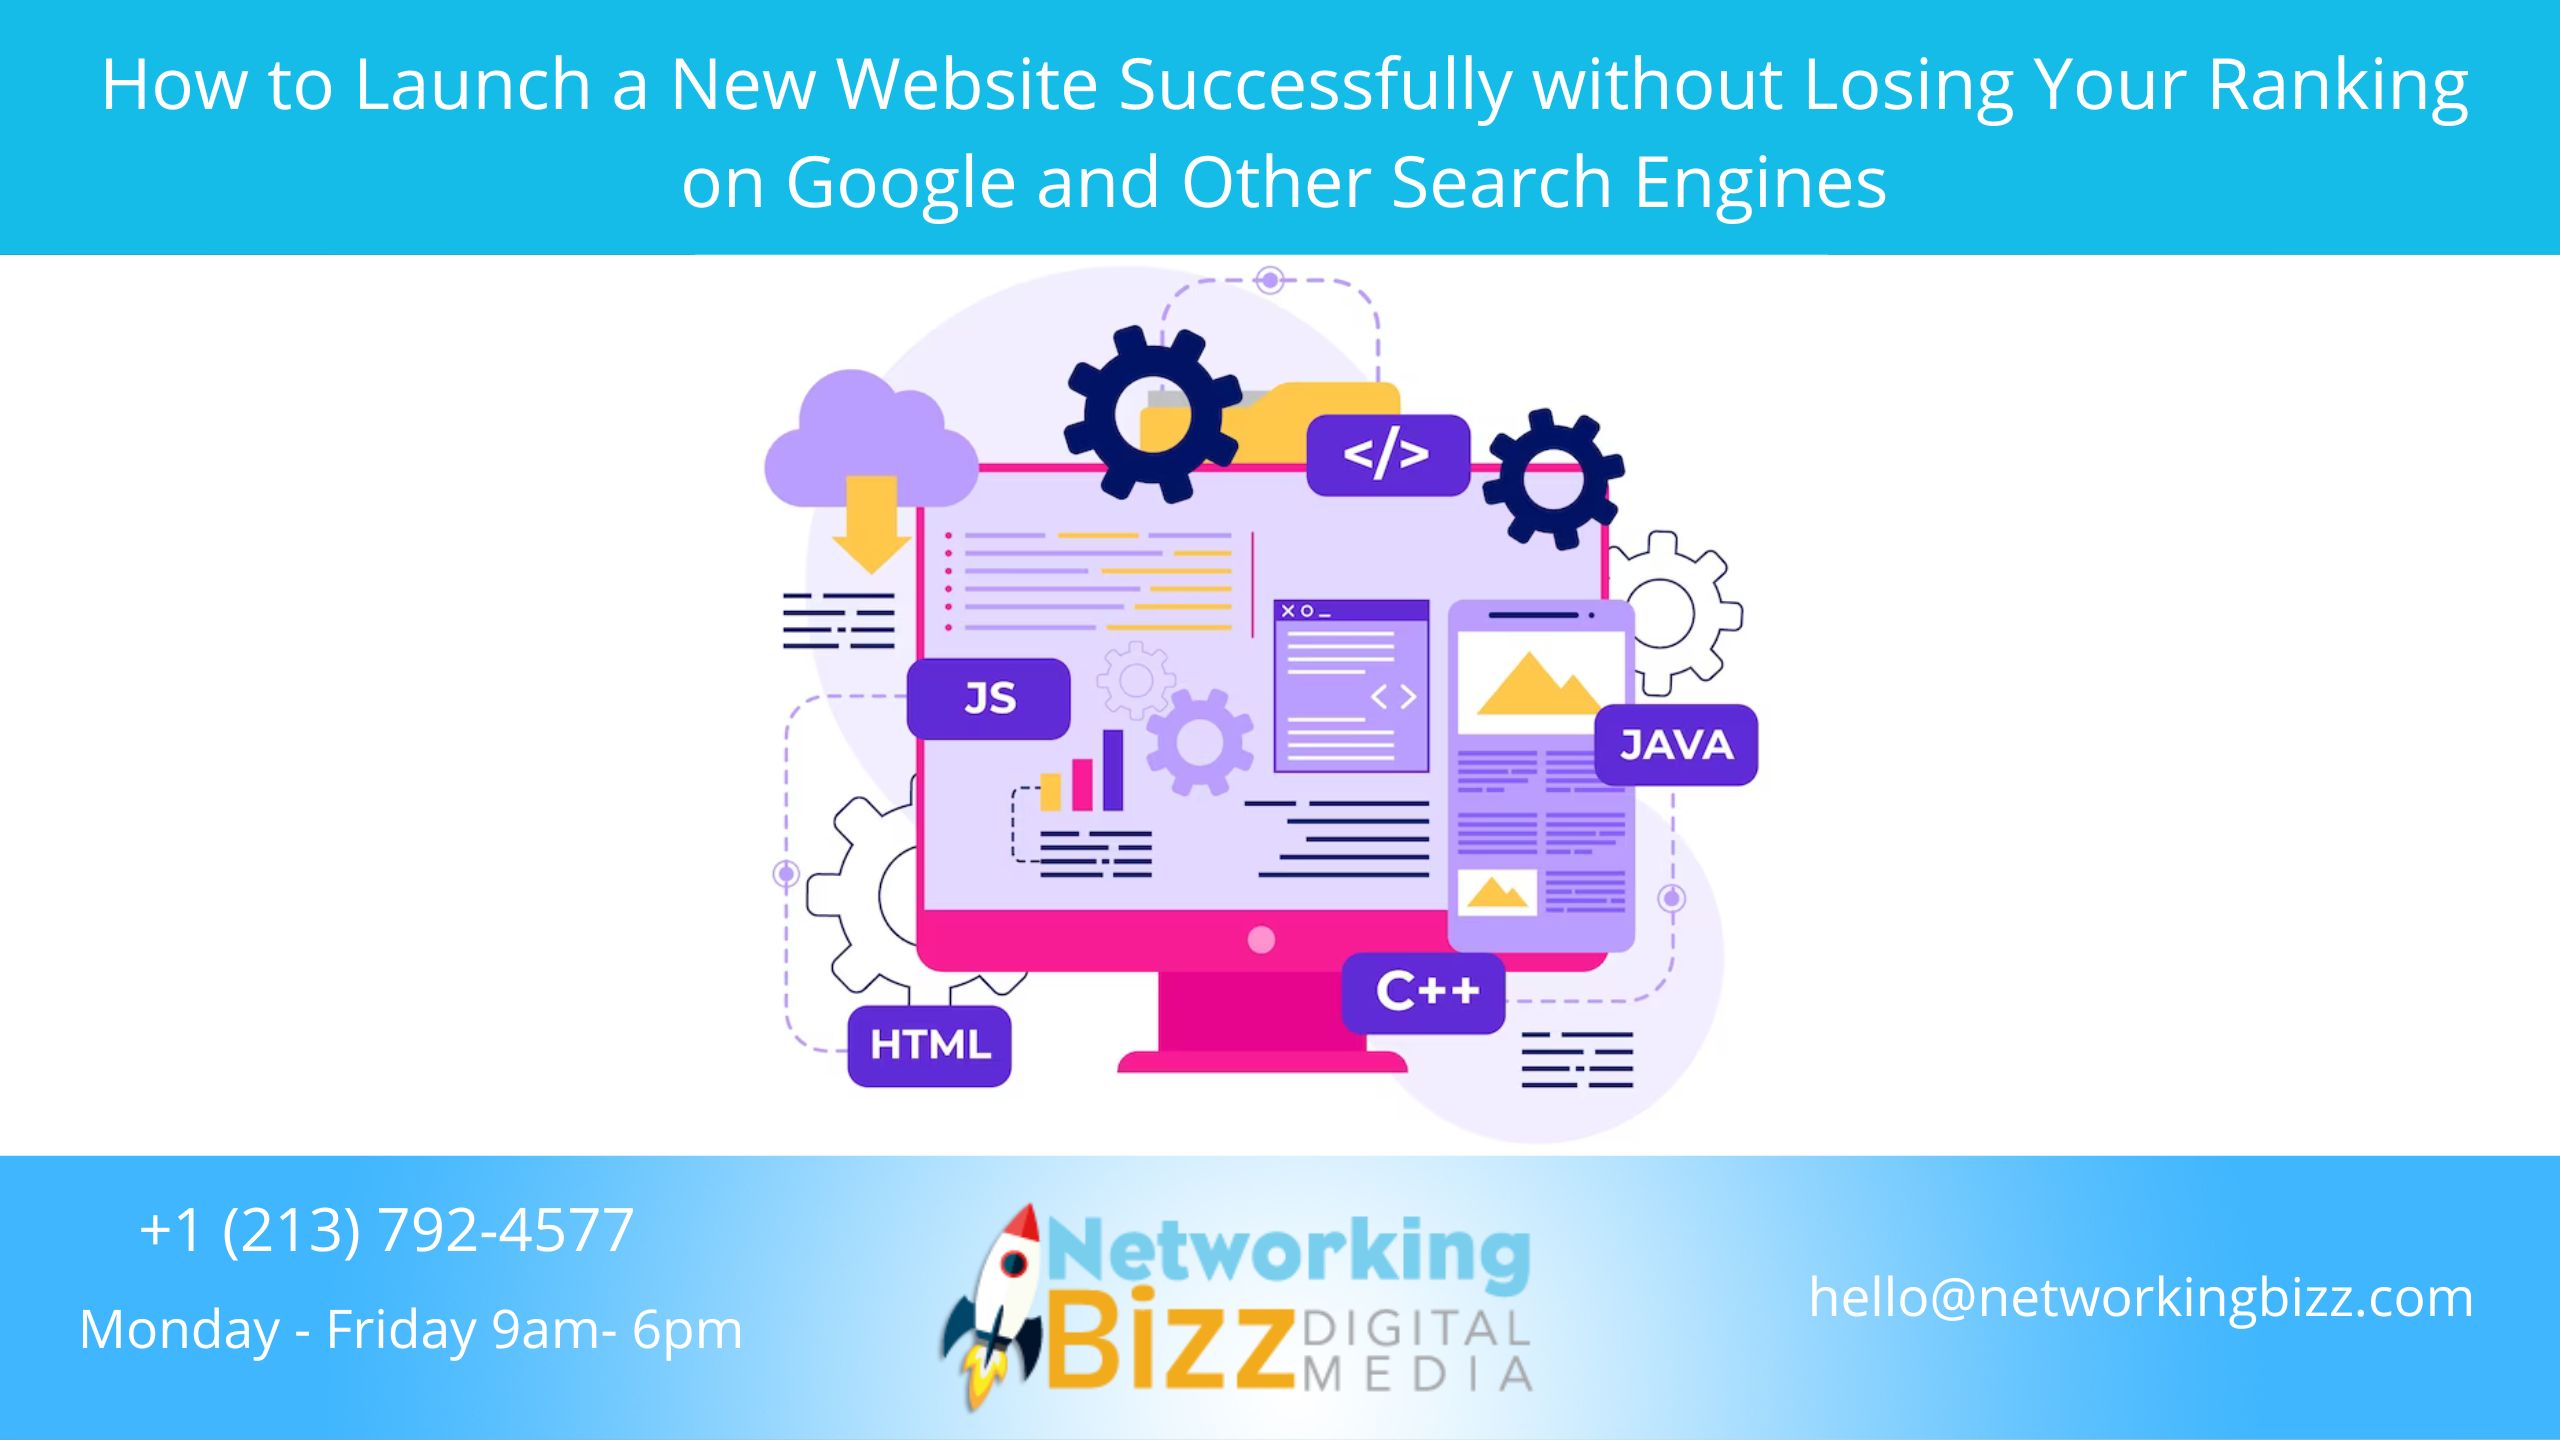 How to Launch a New Website Successfully without Losing Your Ranking on Google and Other Search Engines